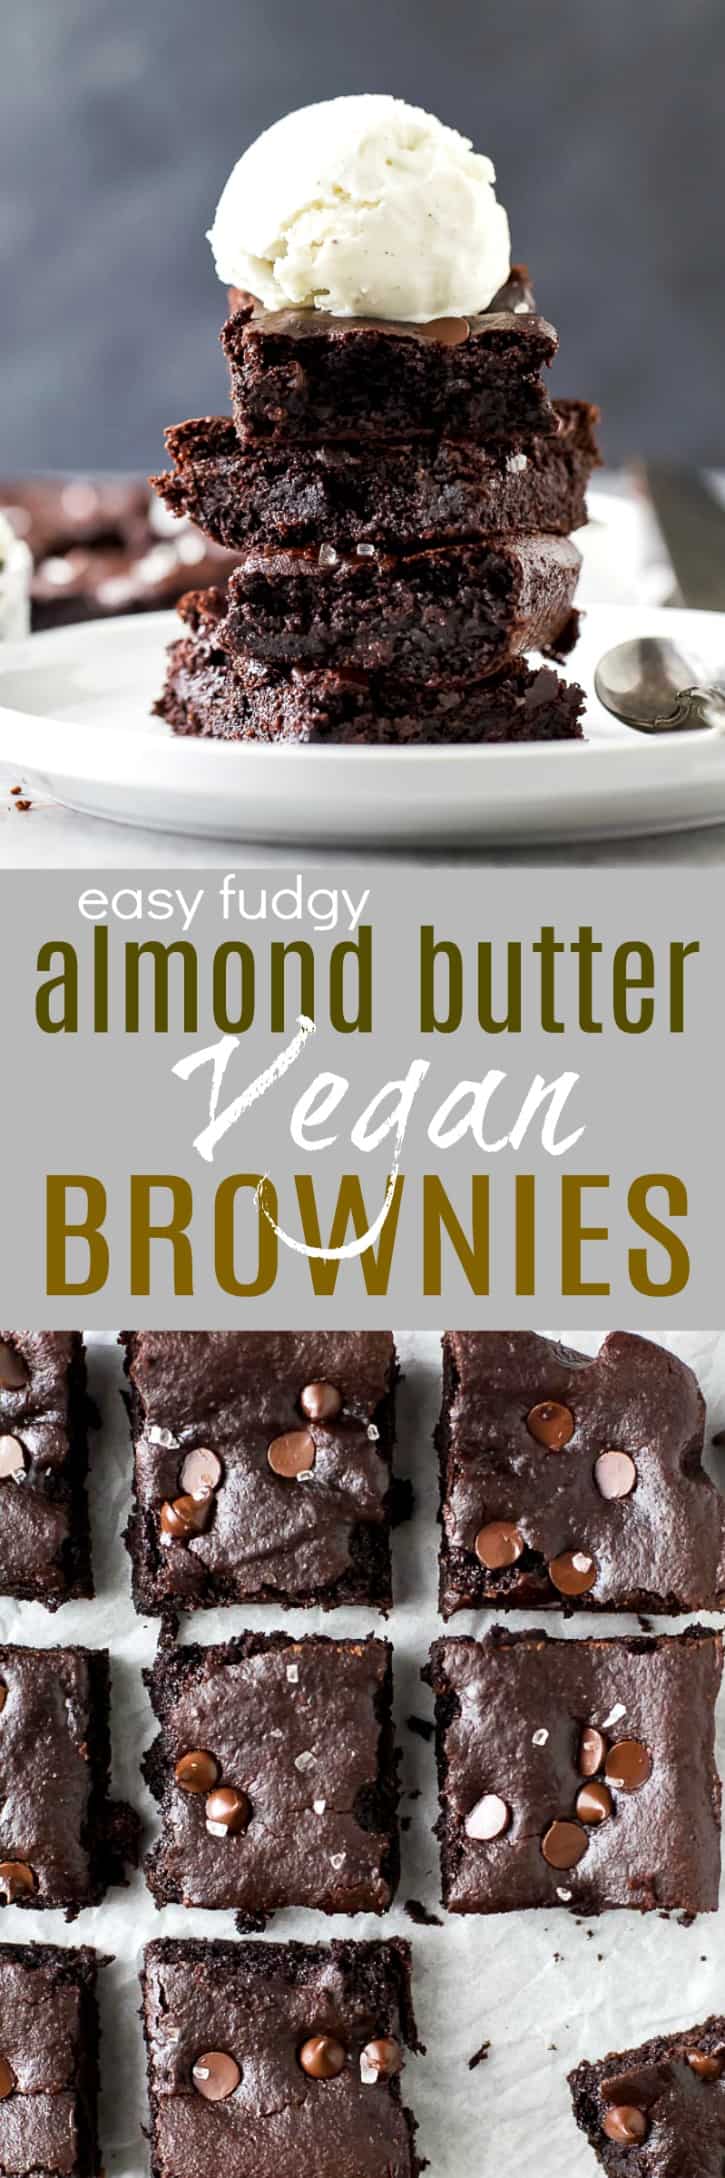 Almond Butter Vegan Brownies - the ultimate fudgy brownie that's insanely easy to make and loaded with intense chocolate flavor! I guarantee these super moist paleo brownies will be a hit with the fam!